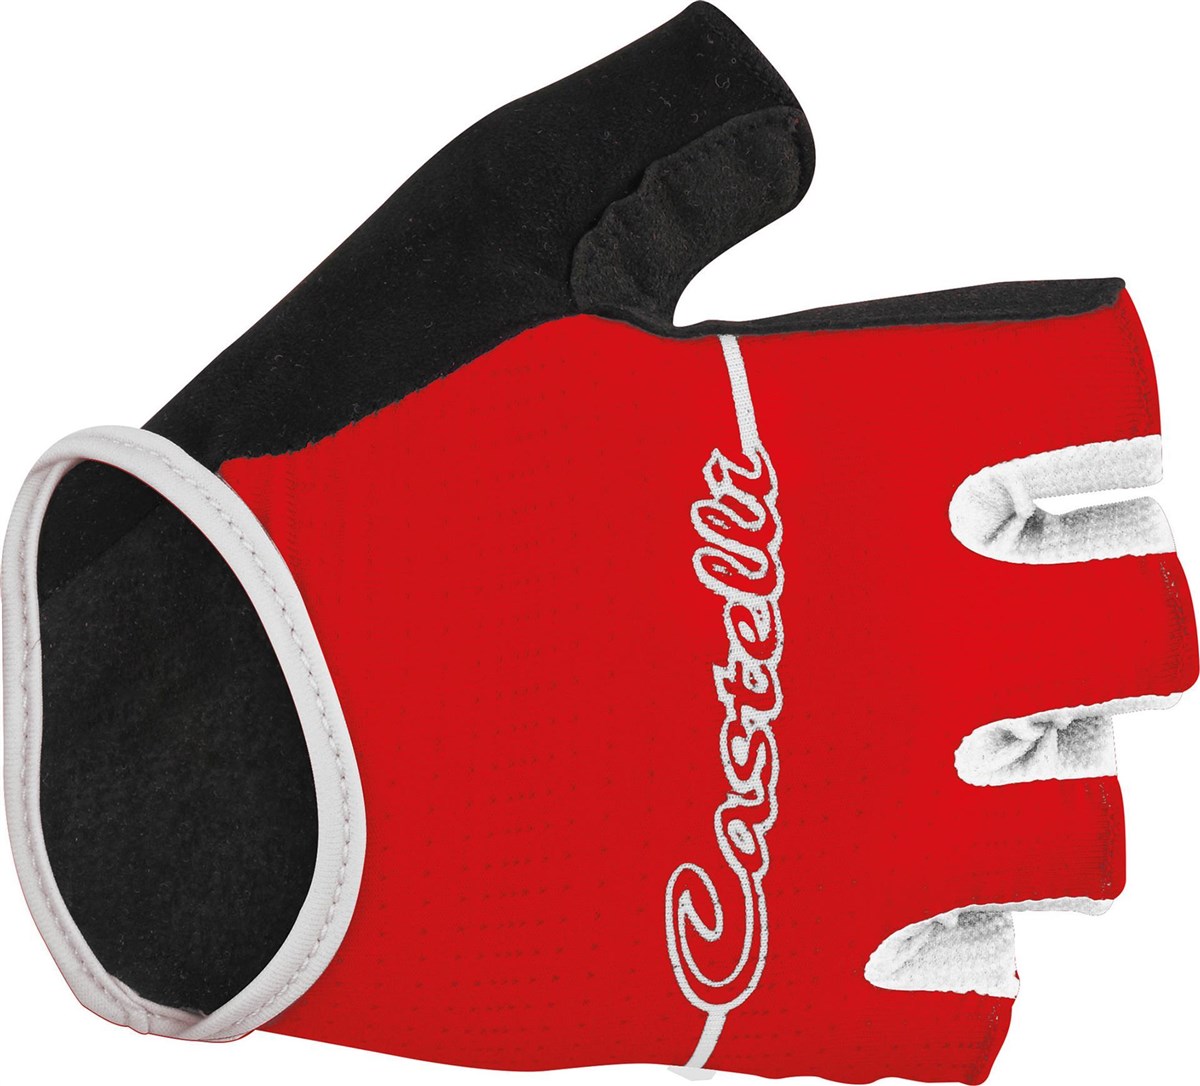 Castelli Dolcissima Womens Short Finger Cycling Gloves